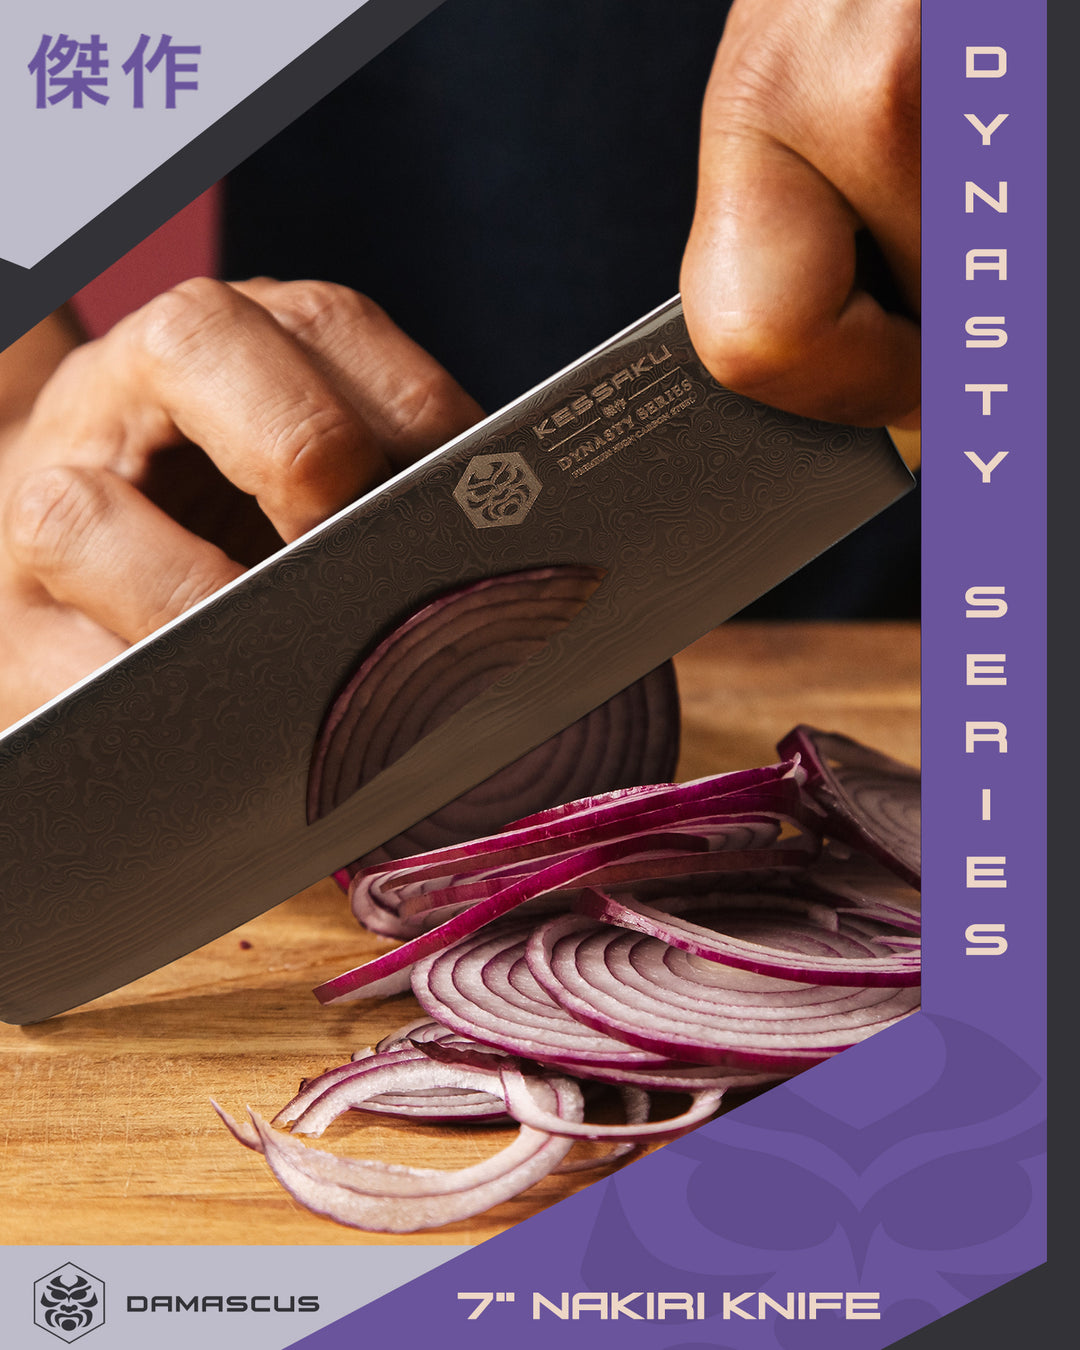 A chef cuts red onions with the Dynasty Damascus Nakiri